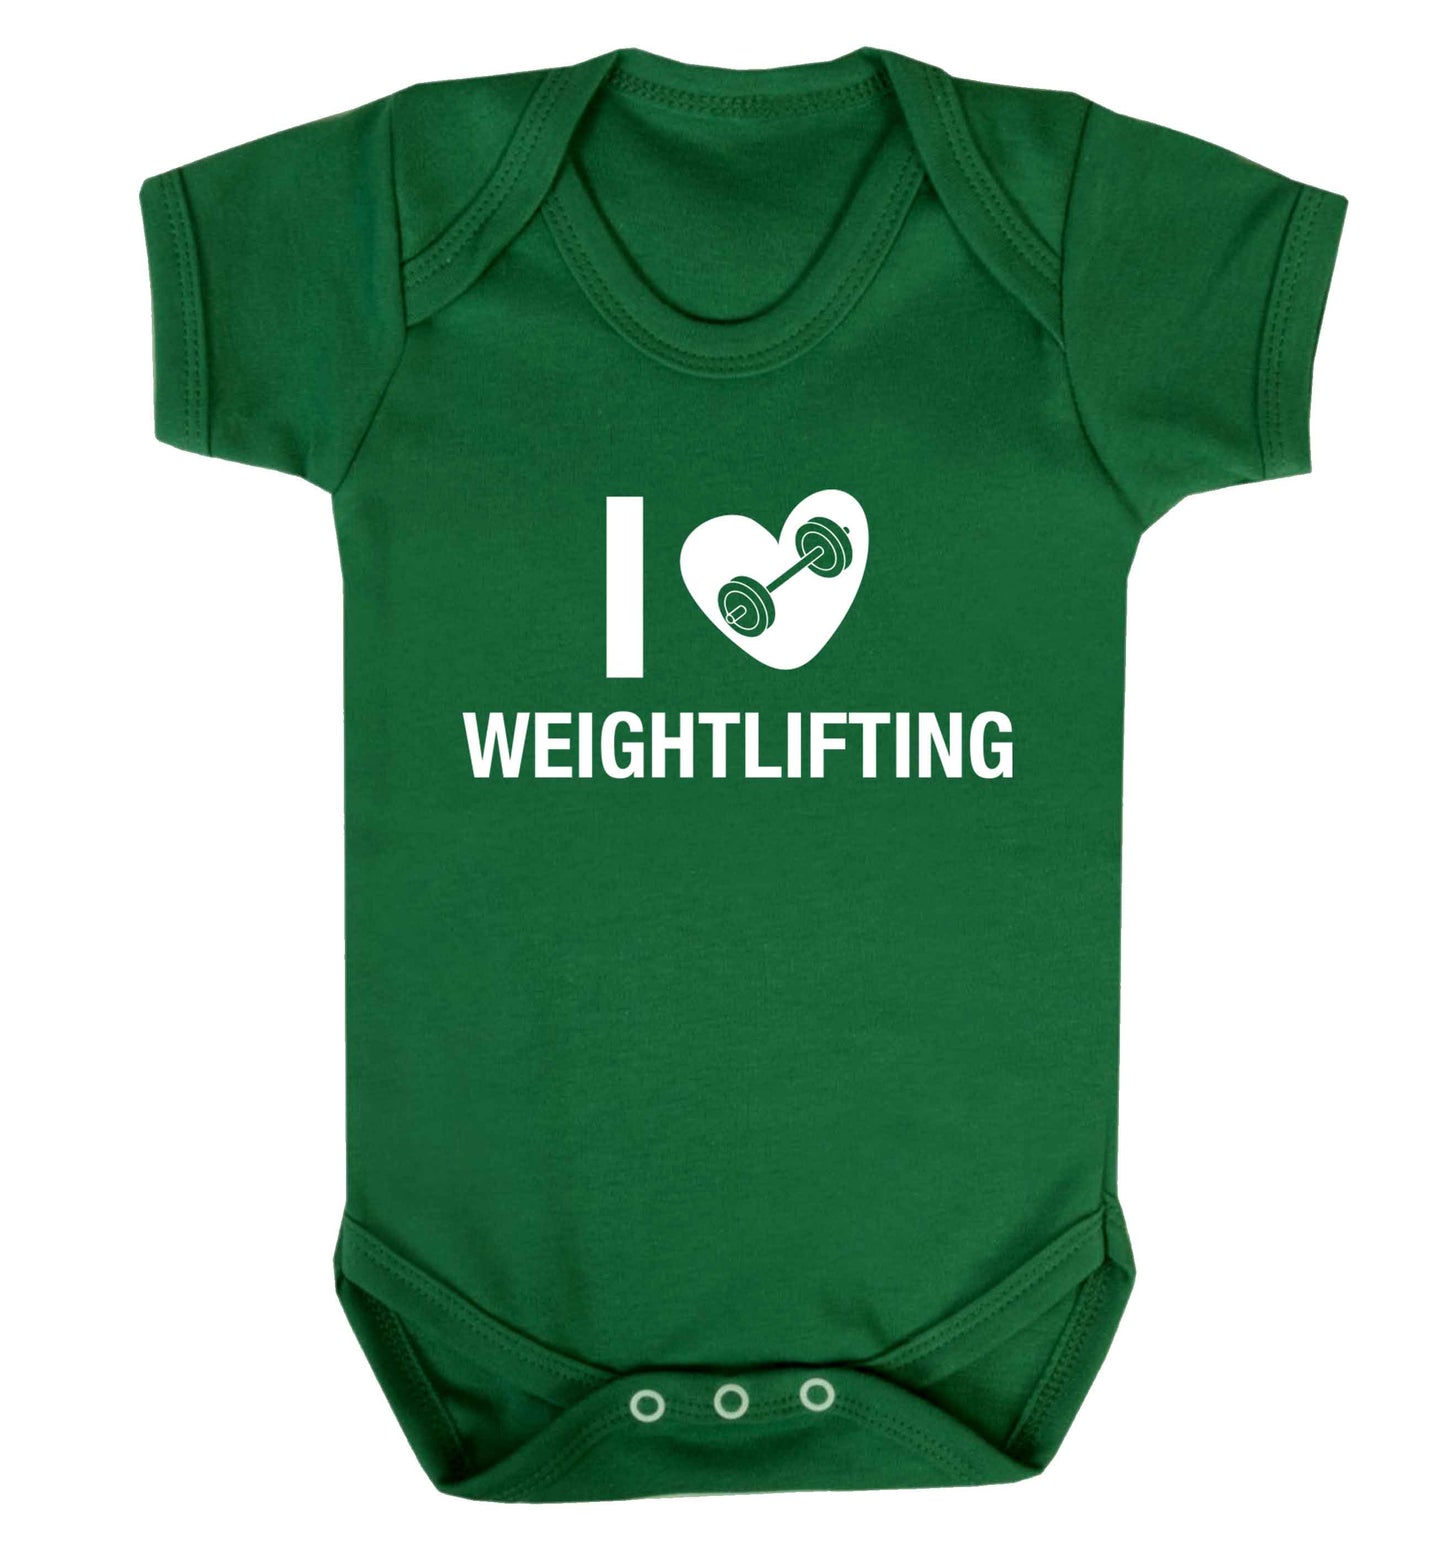 I love weightlifting Baby Vest green 18-24 months